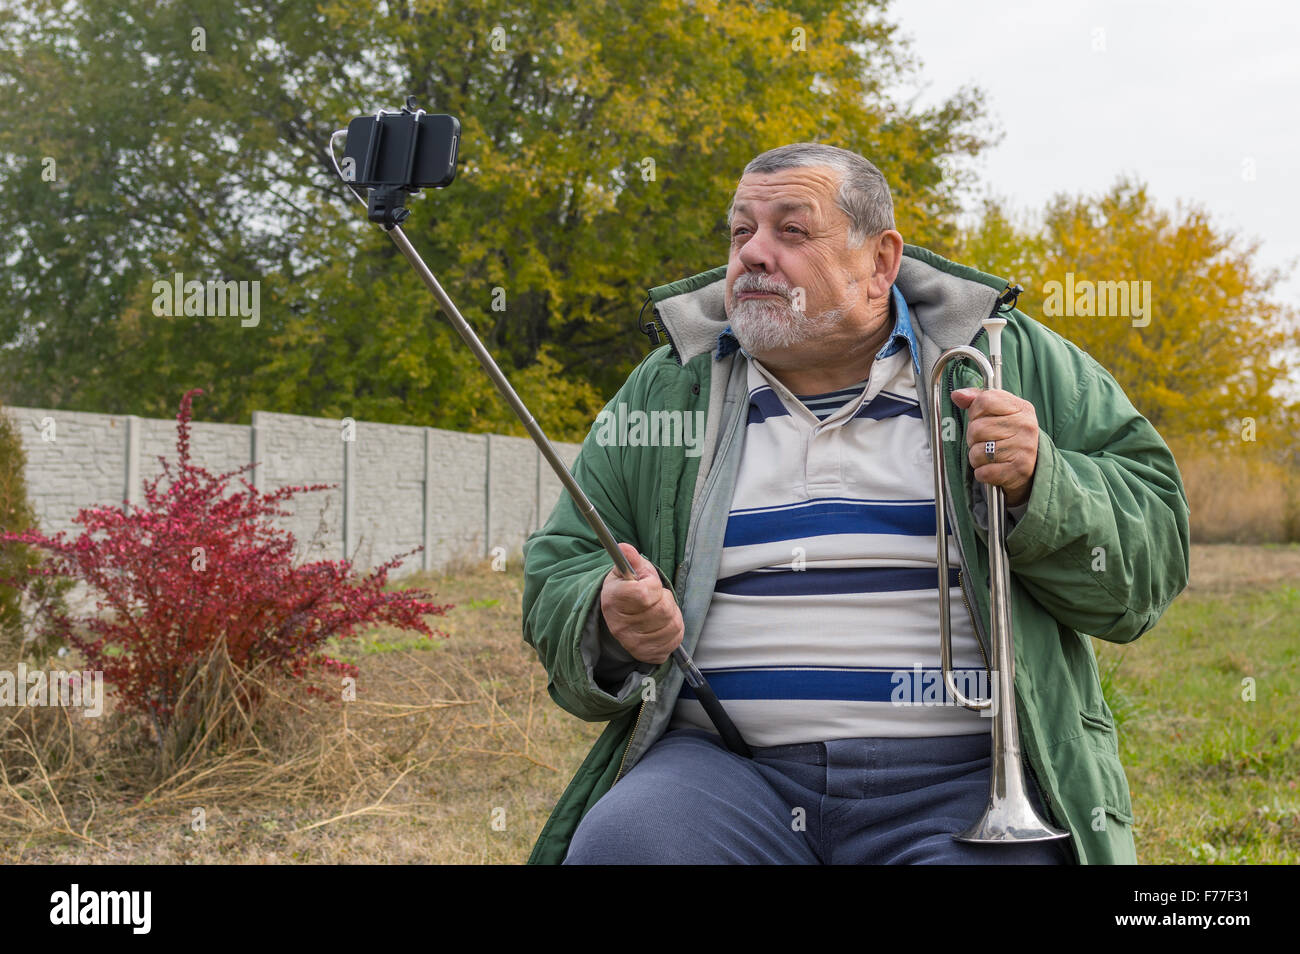 Ridiculous senior man making faces while doing selfie outdoor Stock Photo